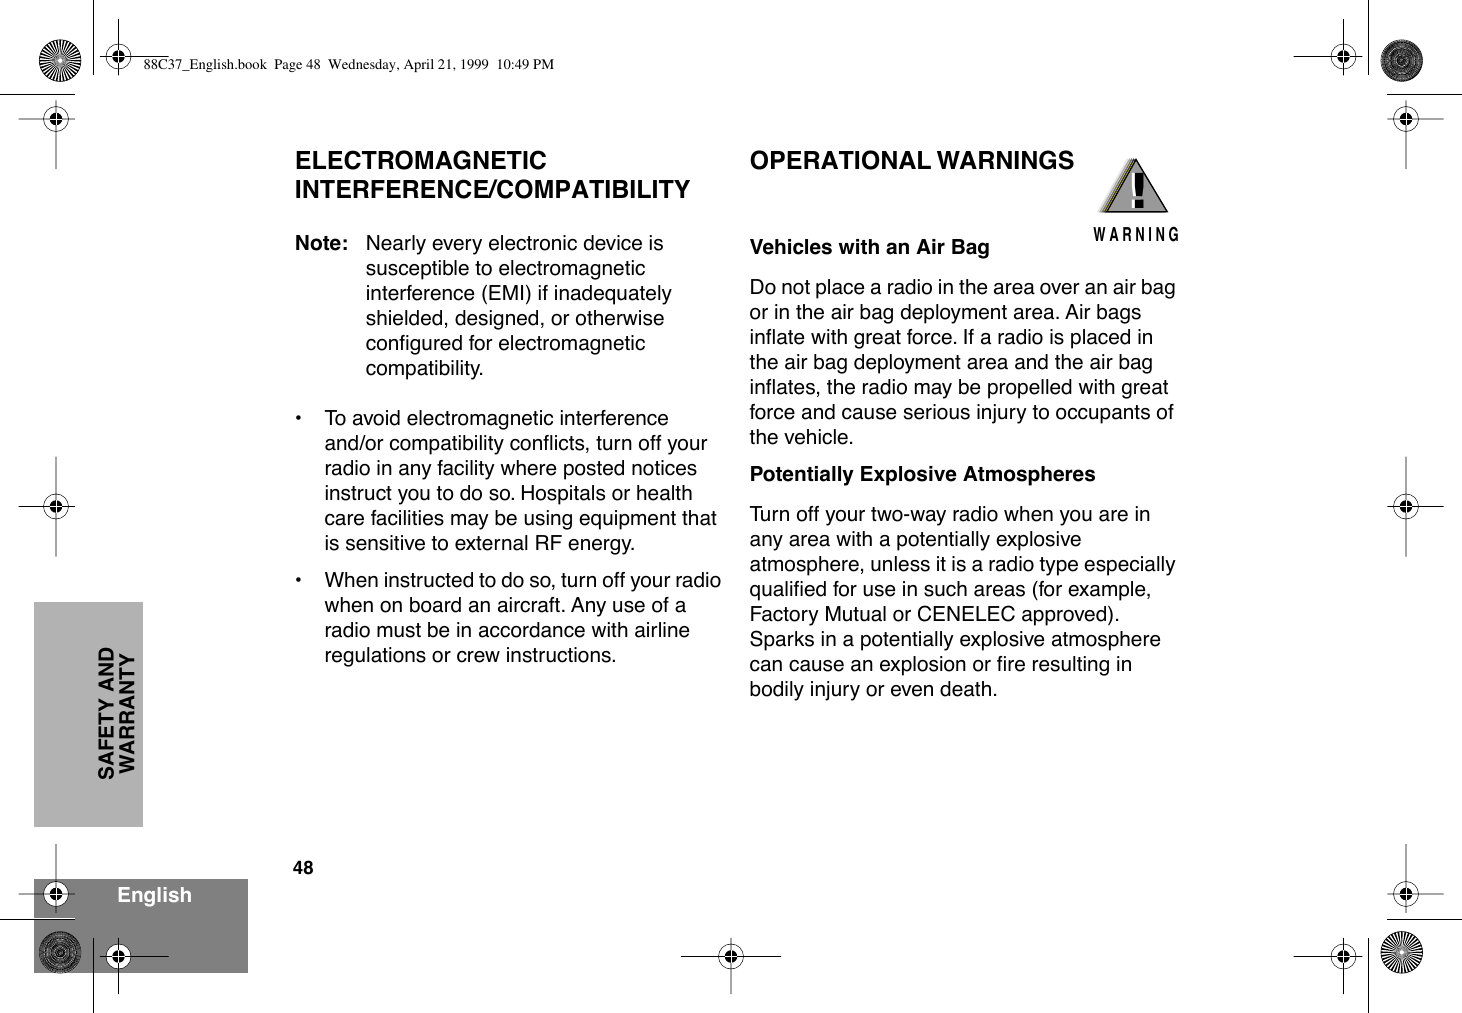 48EnglishSAFETY AND WARRANTYELECTROMAGNETIC INTERFERENCE/COMPATIBILITYNote: Nearly every electronic device is susceptible to electromagnetic interference (EMI) if inadequately shielded, designed, or otherwise conÞgured for electromagnetic compatibility.¥ To avoid electromagnetic interference and/or compatibility conßicts, turn off your radio in any facility where posted notices instruct you to do so. Hospitals or health care facilities may be using equipment that is sensitive to external RF energy.¥ When instructed to do so, turn off your radio when on board an aircraft. Any use of a radio must be in accordance with airline regulations or crew instructions.OPERATIONAL WARNINGSVehicles with an Air BagDo not place a radio in the area over an air bag or in the air bag deployment area. Air bags inßate with great force. If a radio is placed in the air bag deployment area and the air bag inßates, the radio may be propelled with great force and cause serious injury to occupants of the vehicle.Potentially Explosive AtmospheresTurn off your two-way radio when you are in any area with a potentially explosive atmosphere, unless it is a radio type especially qualiÞed for use in such areas (for example, Factory Mutual or CENELEC approved). Sparks in a potentially explosive atmosphere can cause an explosion or Þre resulting in bodily injury or even death.!W A R N I N G!88C37_English.book  Page 48  Wednesday, April 21, 1999  10:49 PM